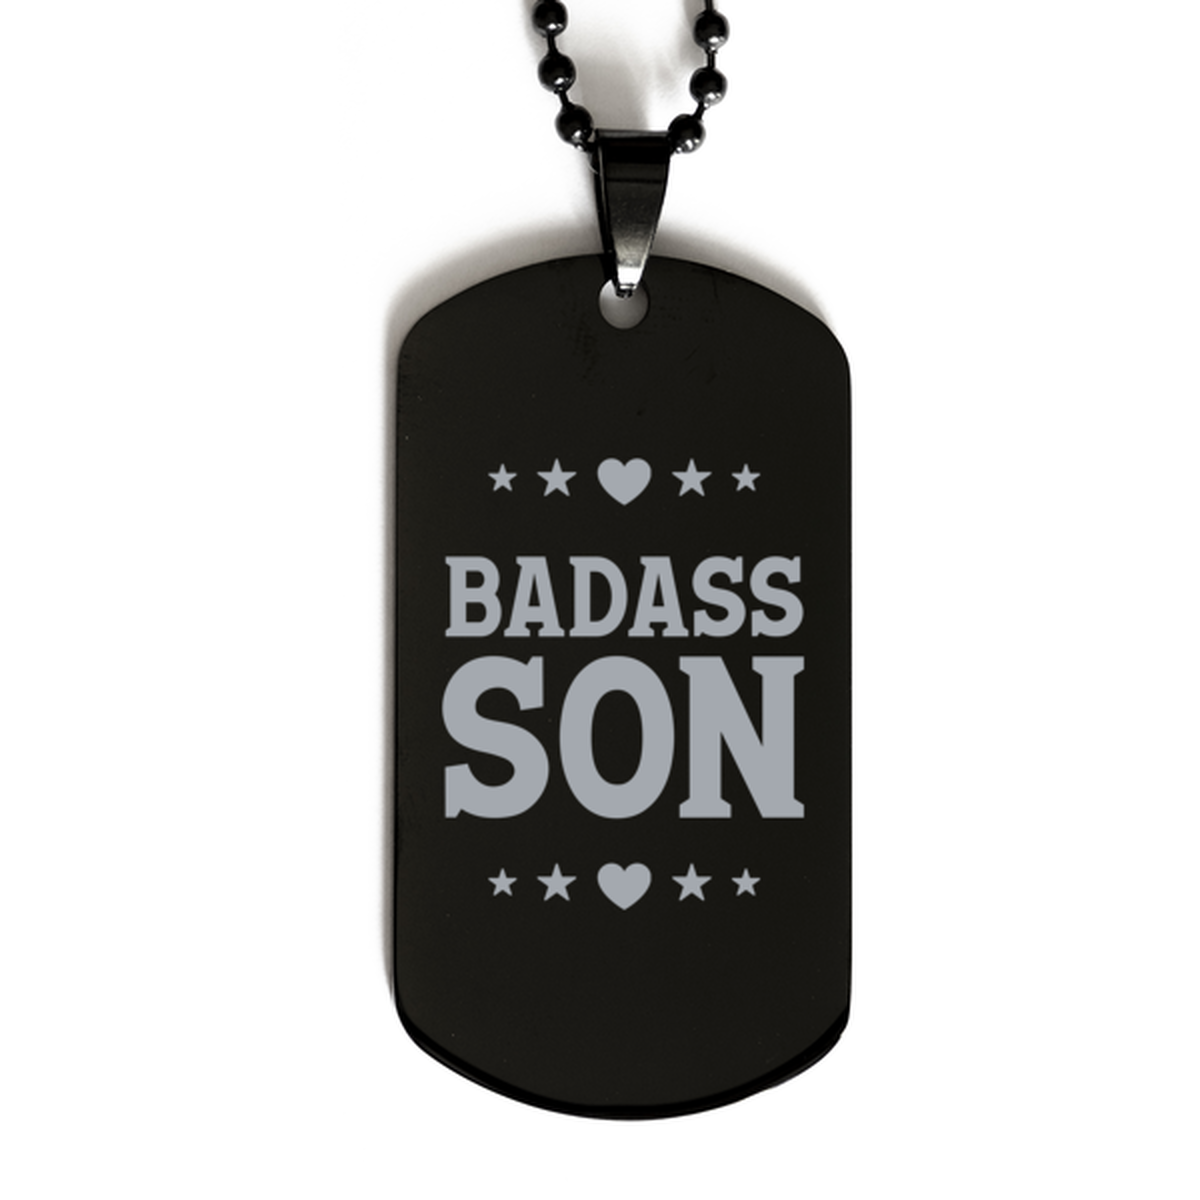 Son Black Dog Tag, Badass Son, Funny Family Gifts  Necklace For Son From Dad Mom